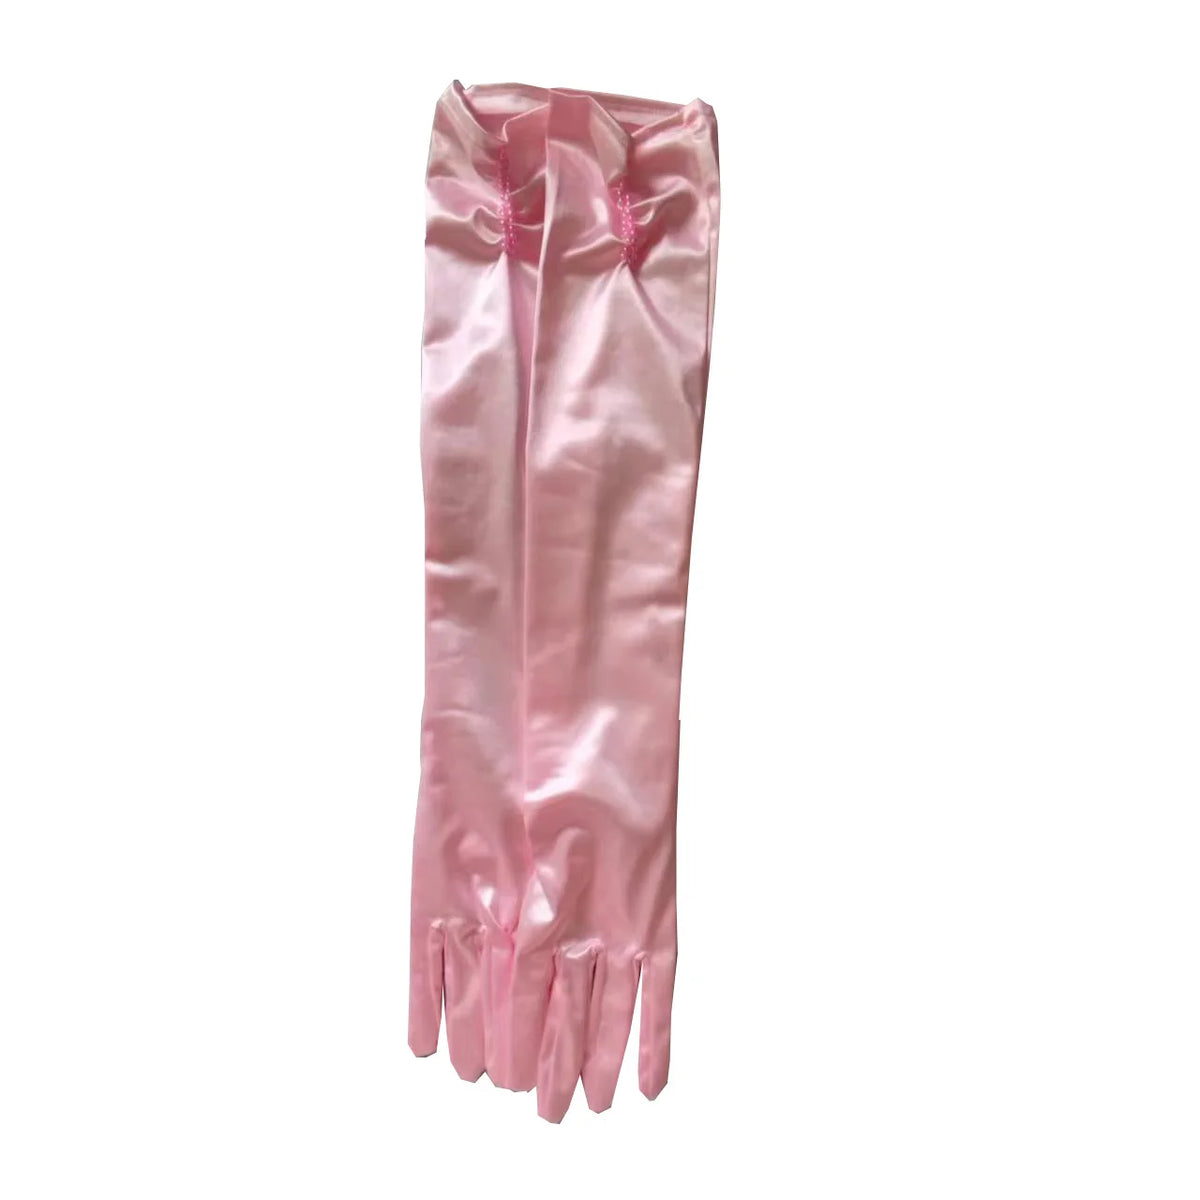 a pair of pink gloves on a white background